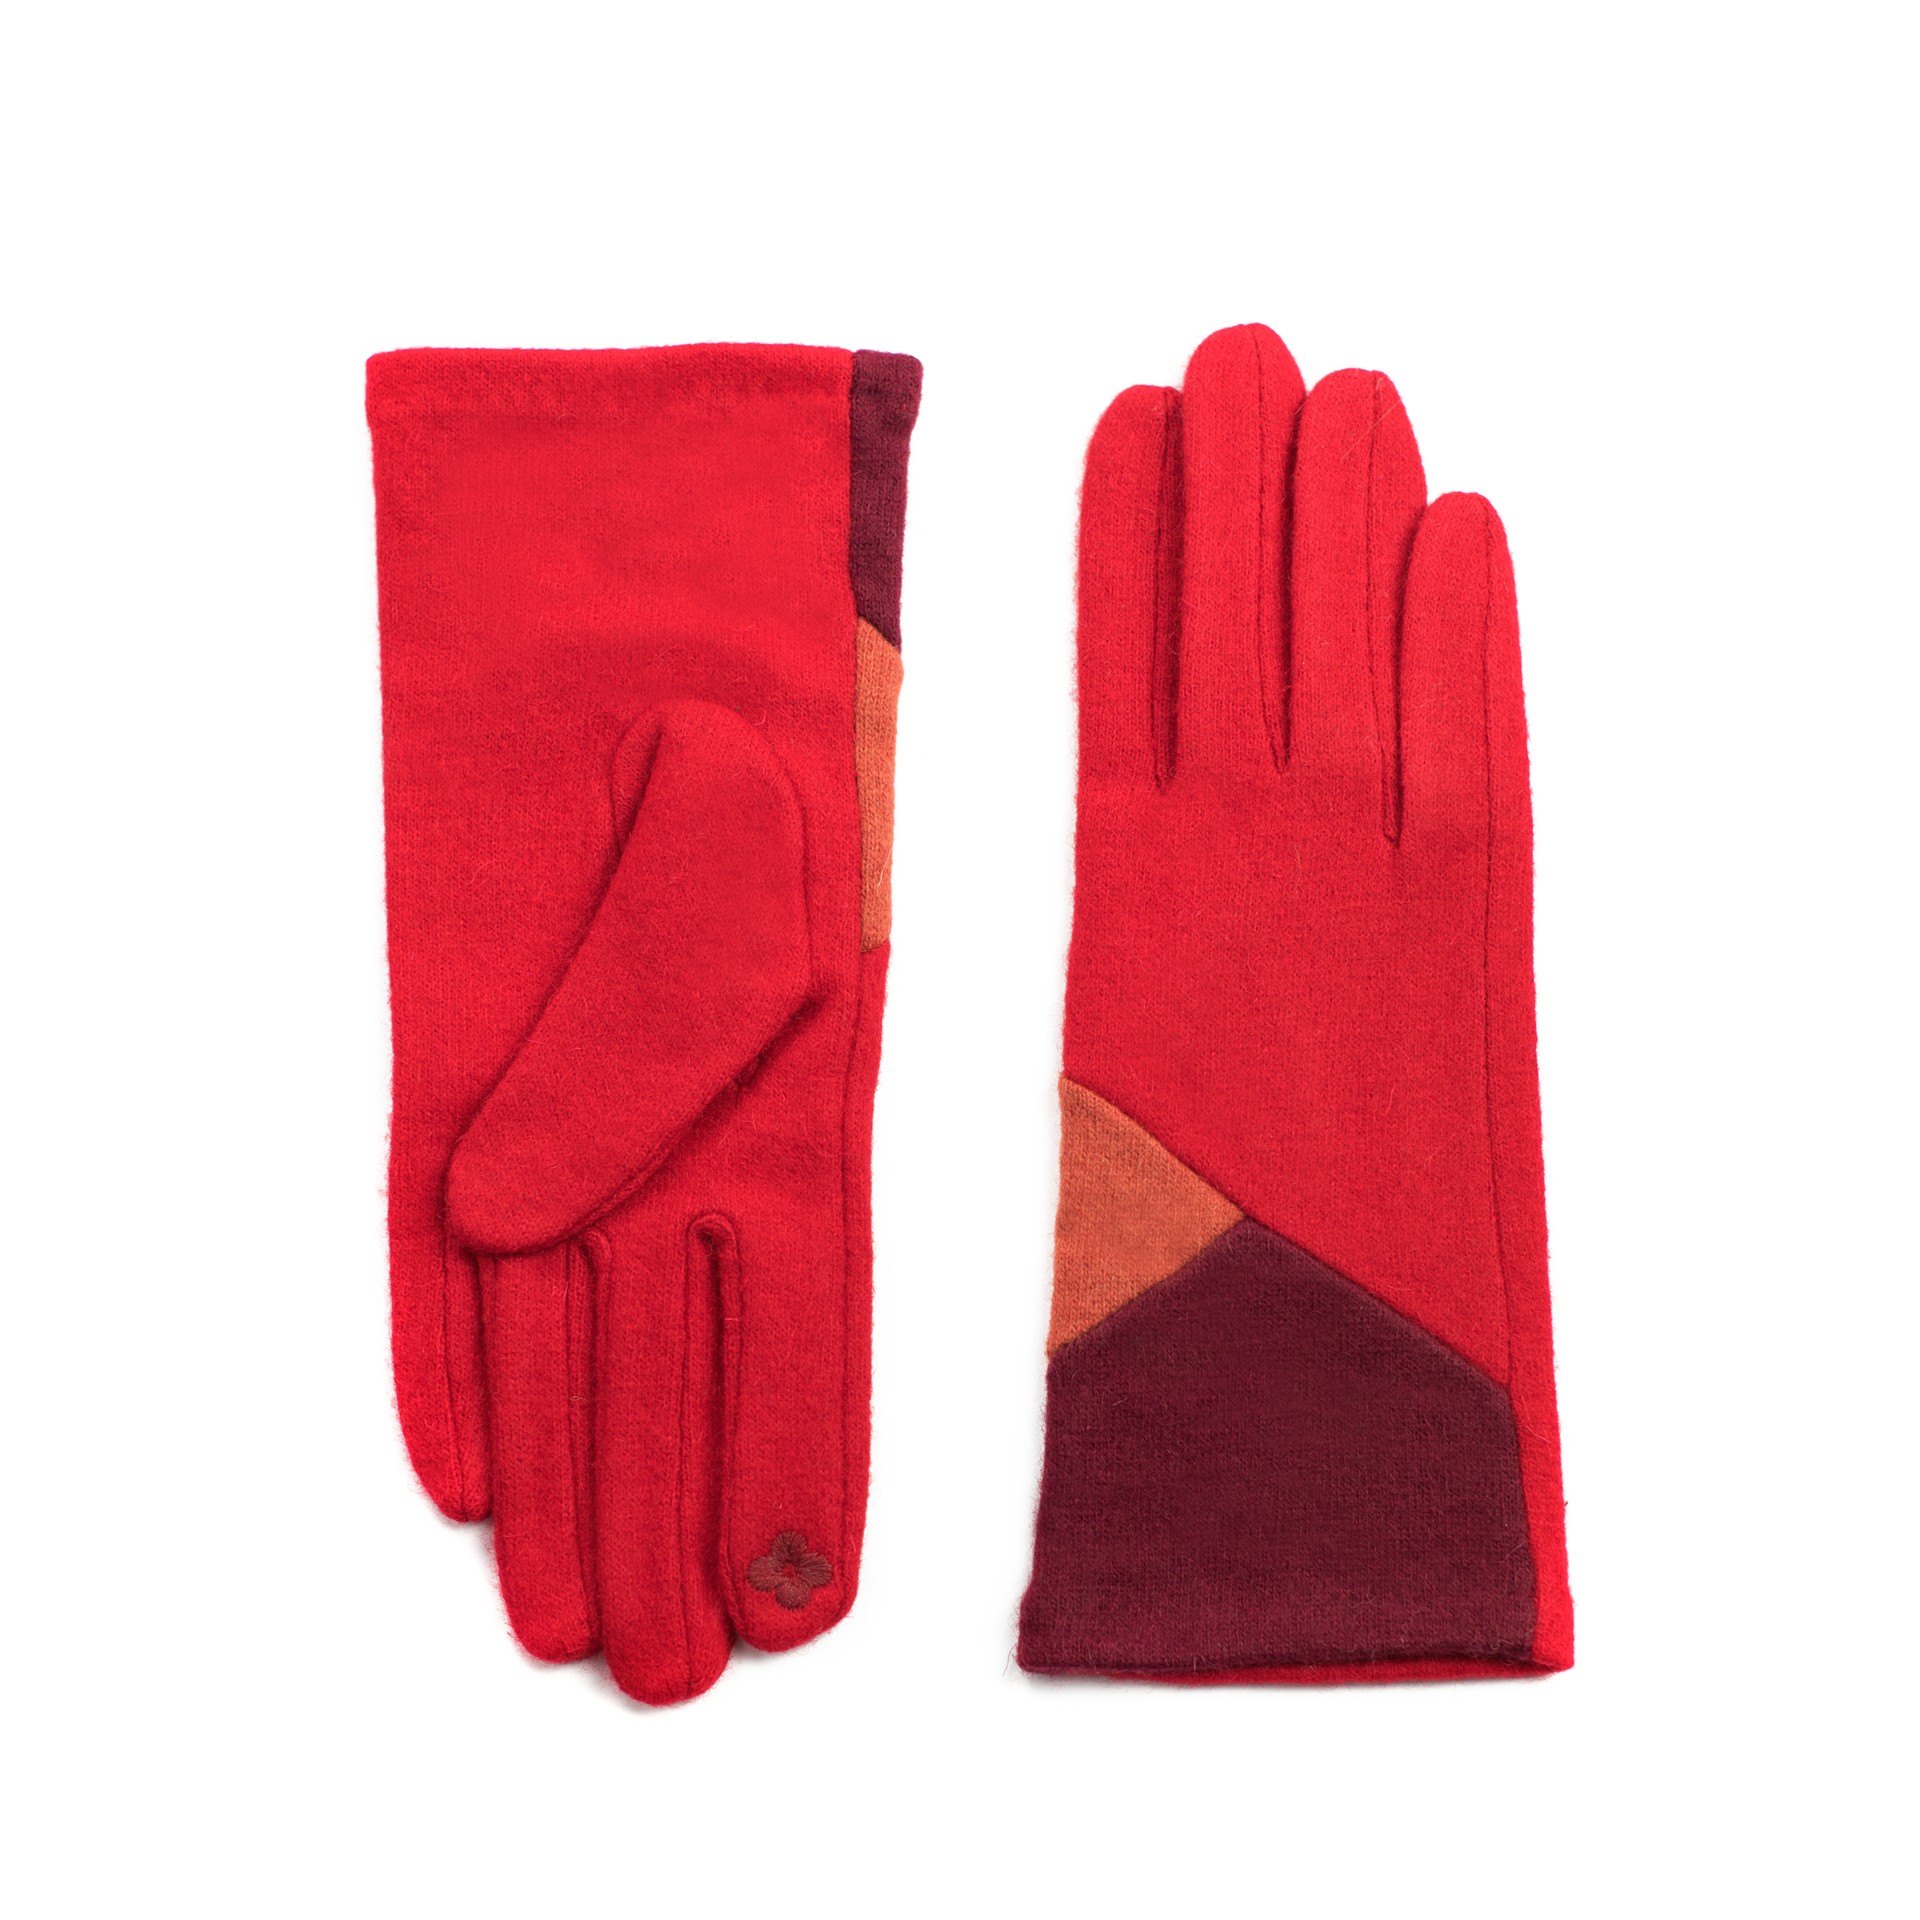 Art Of Polo Woman's Gloves rk20325